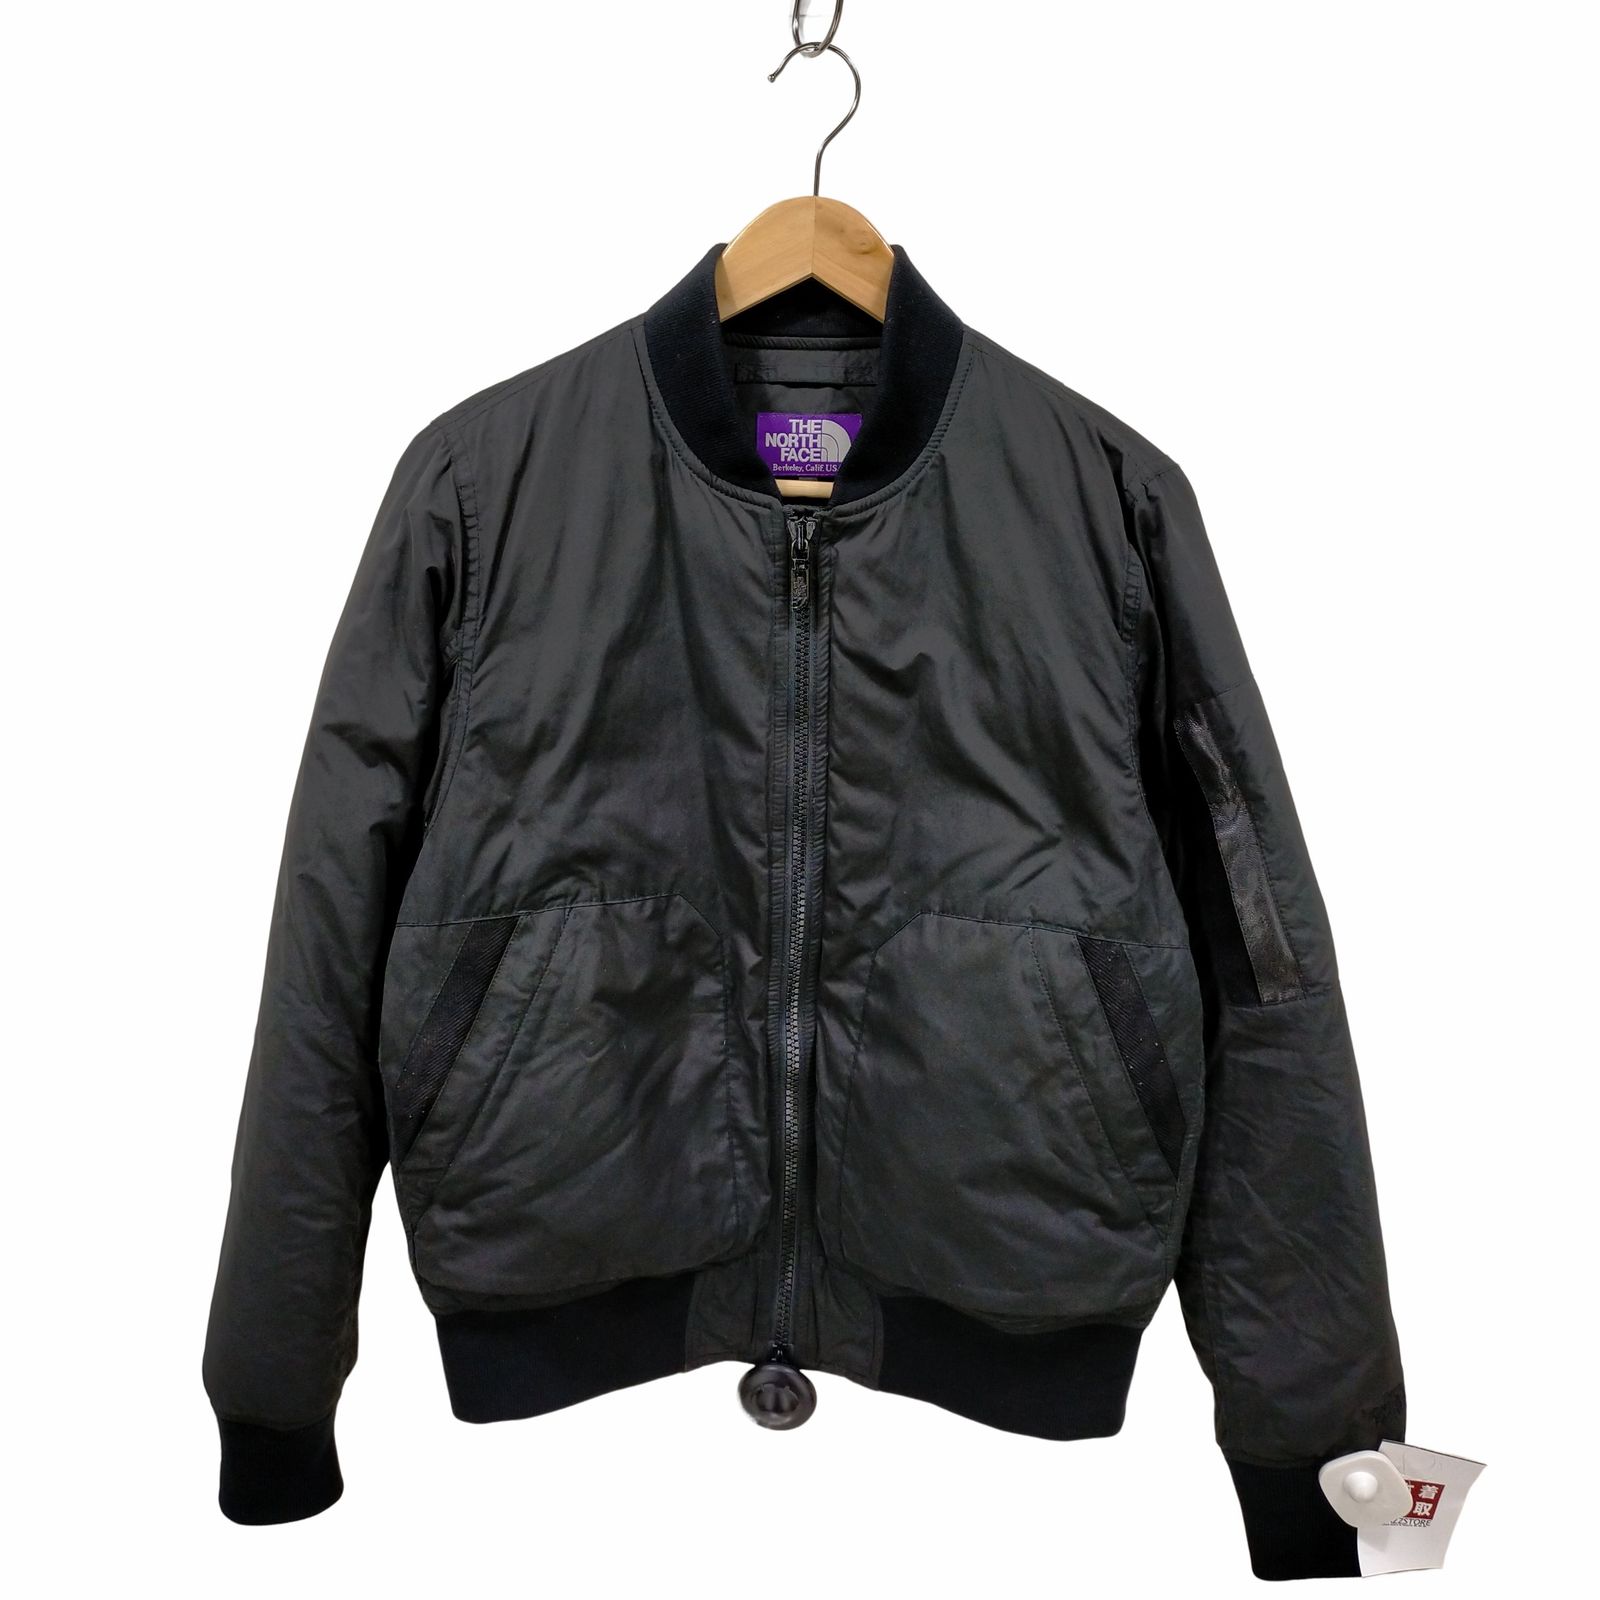 THE NORTH FACE PURPLE LABEL Mountain Field Jacket ma-1ノース 